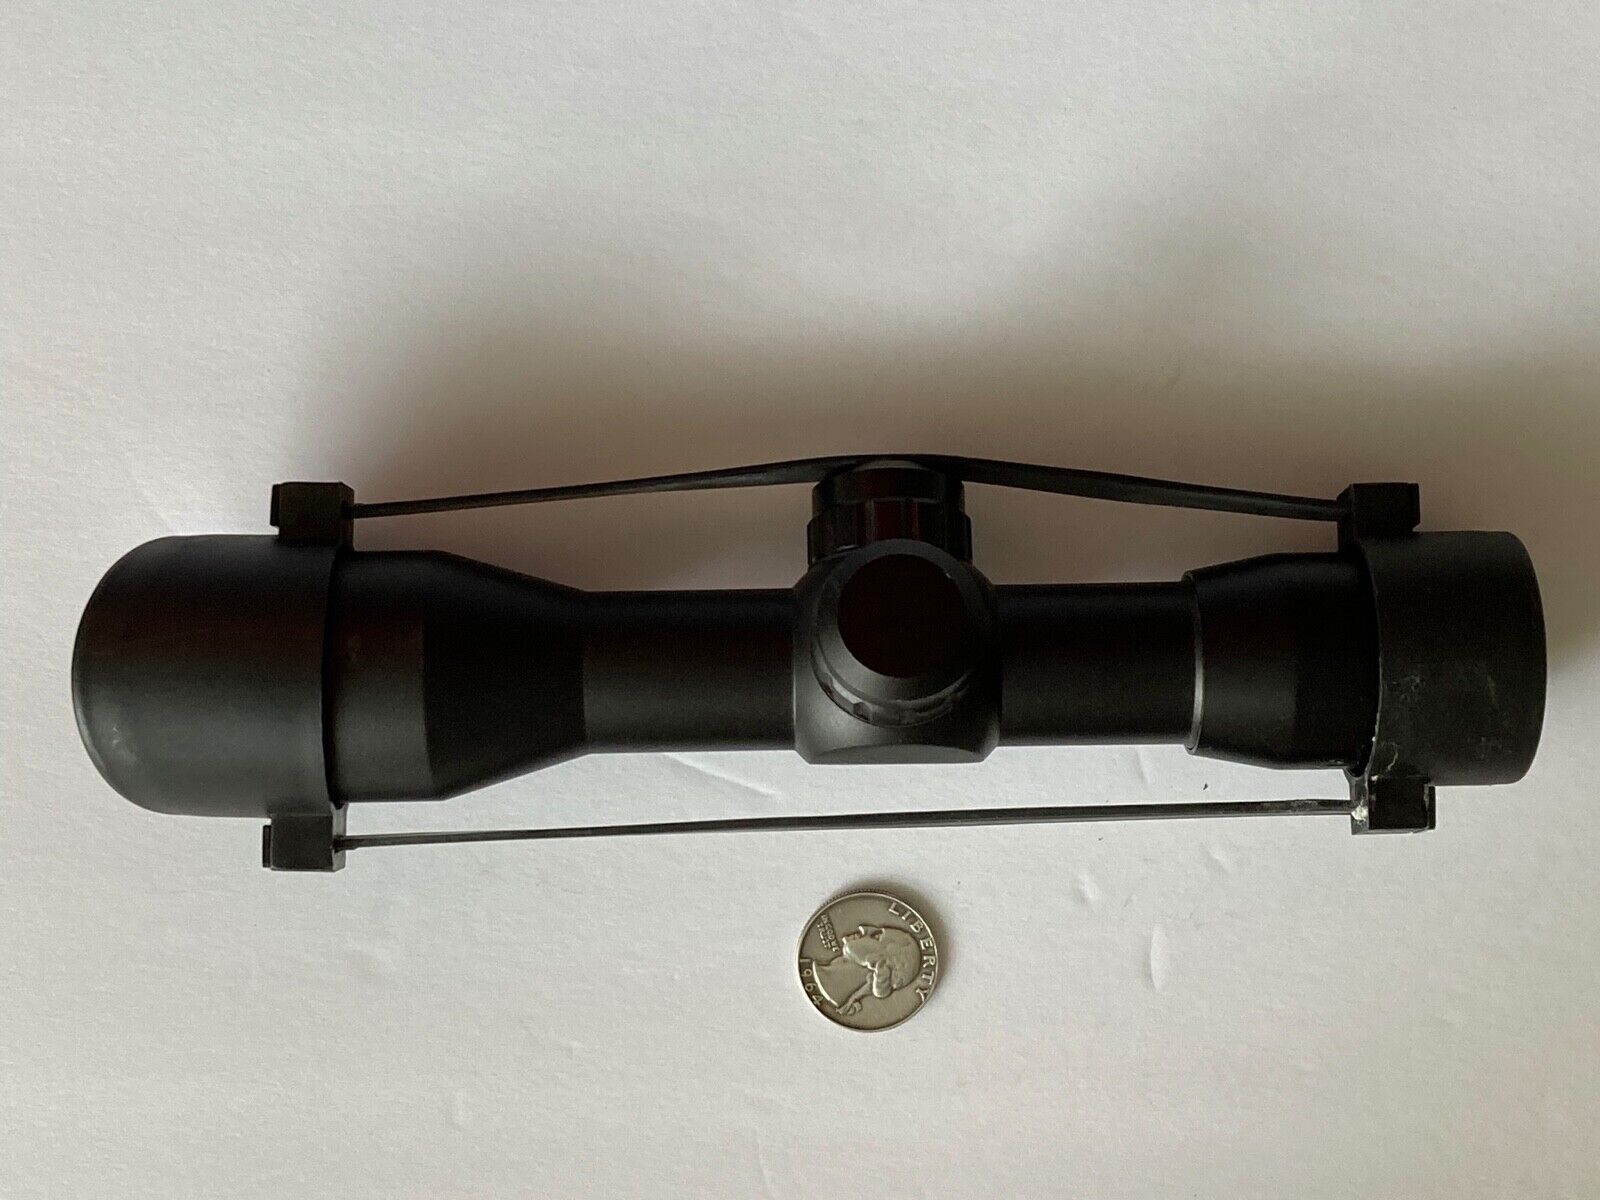 NCSTAR MIL-DOT 4X32 BLACK RIFLE SCOPE OPTIC WITH LENS COVERS US (NO MOUNT RINGS)